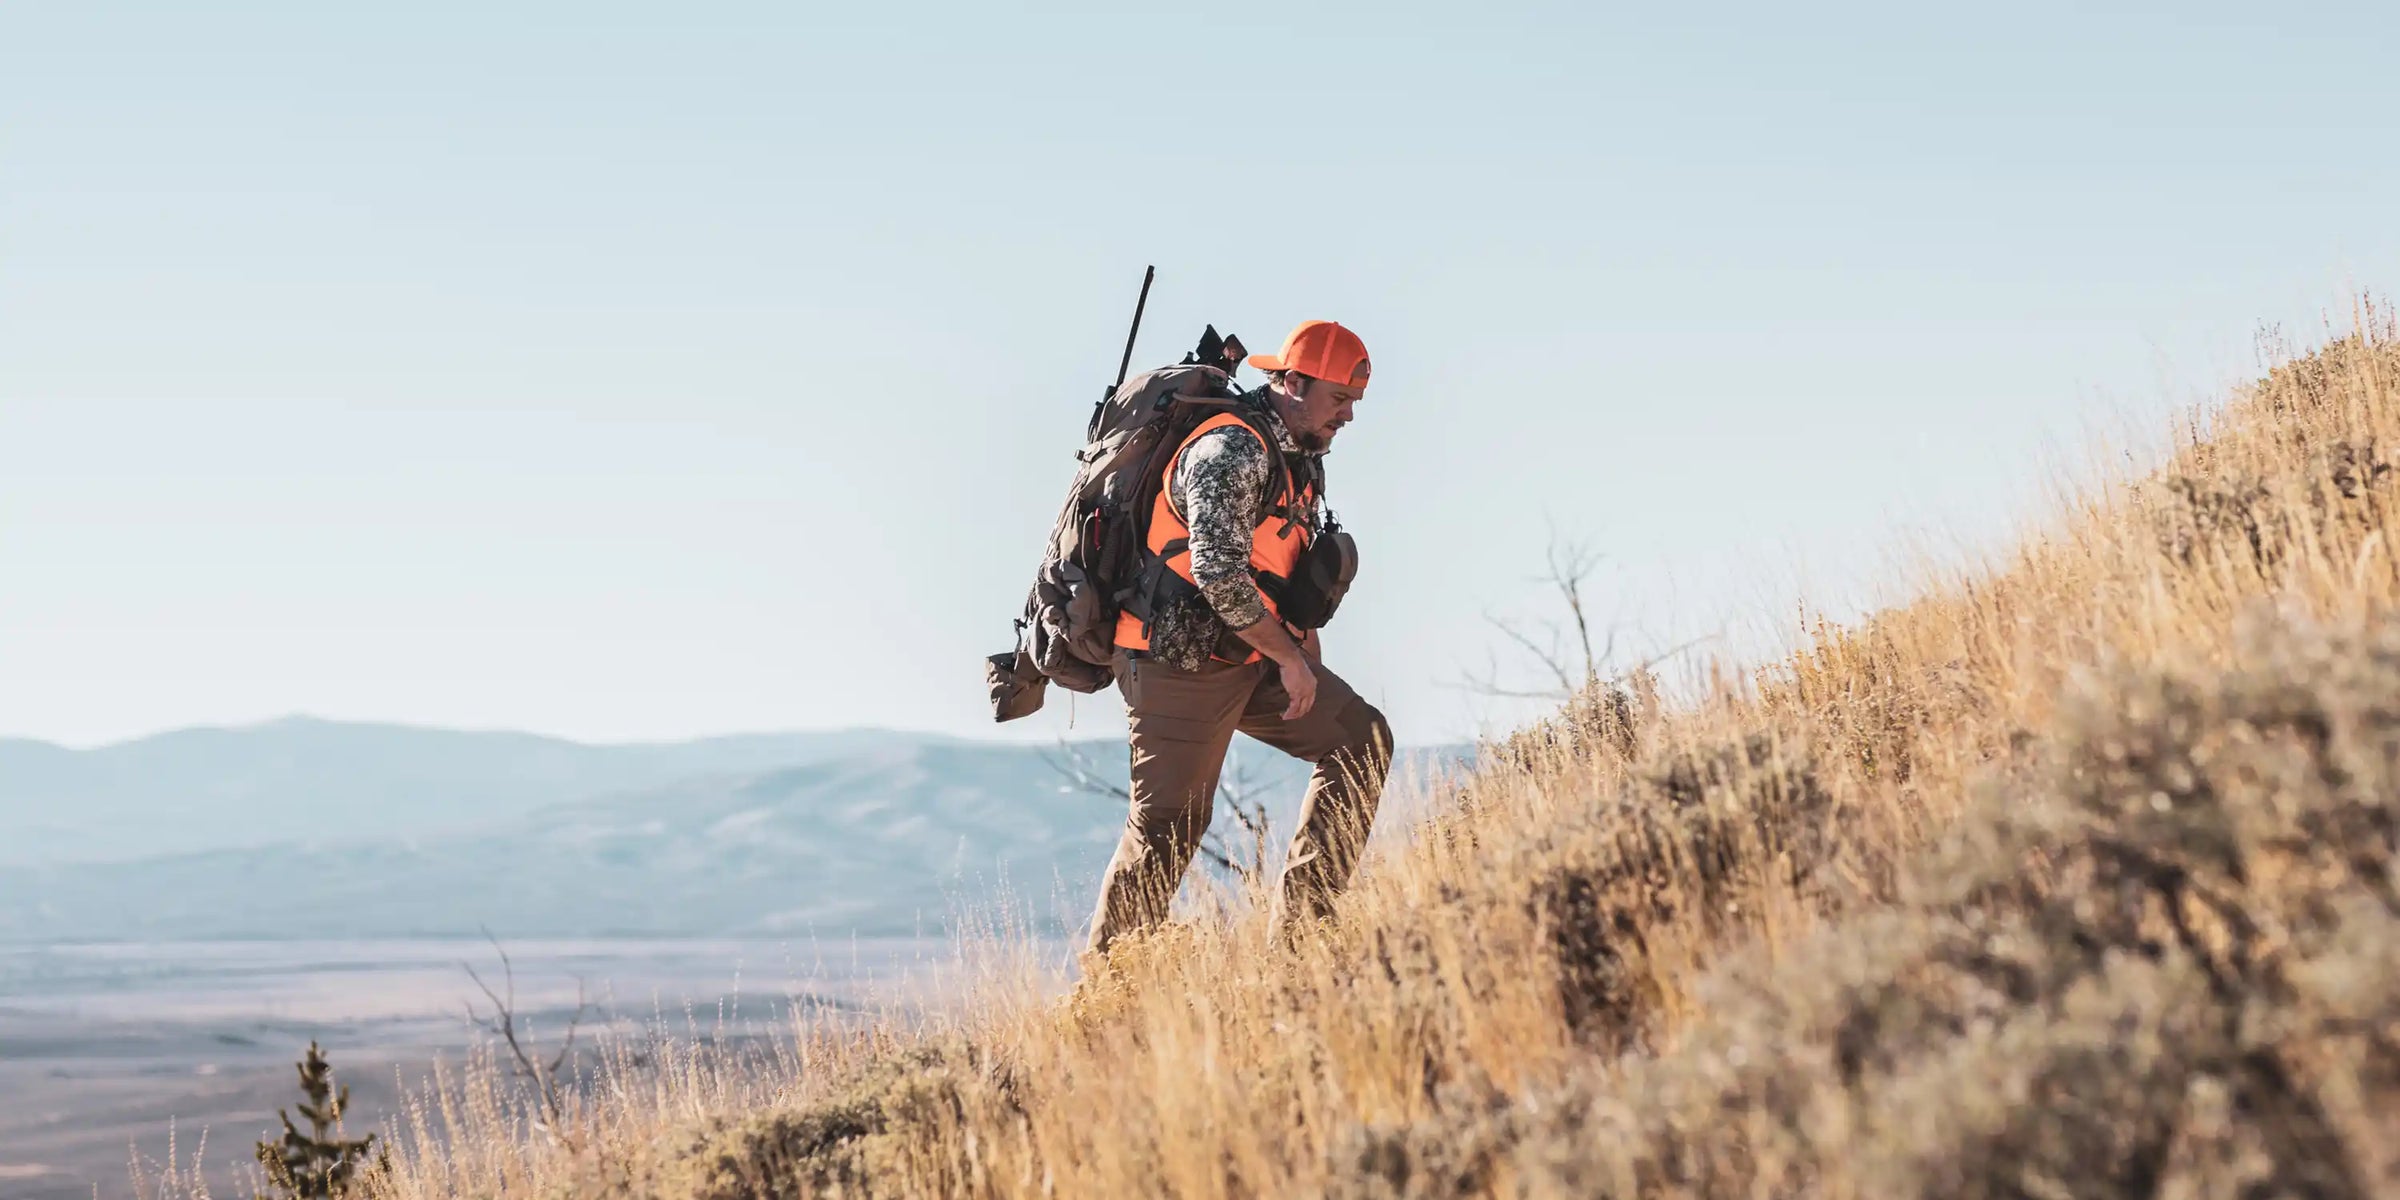 Hunting Store and Outdoor Gear For Canadians